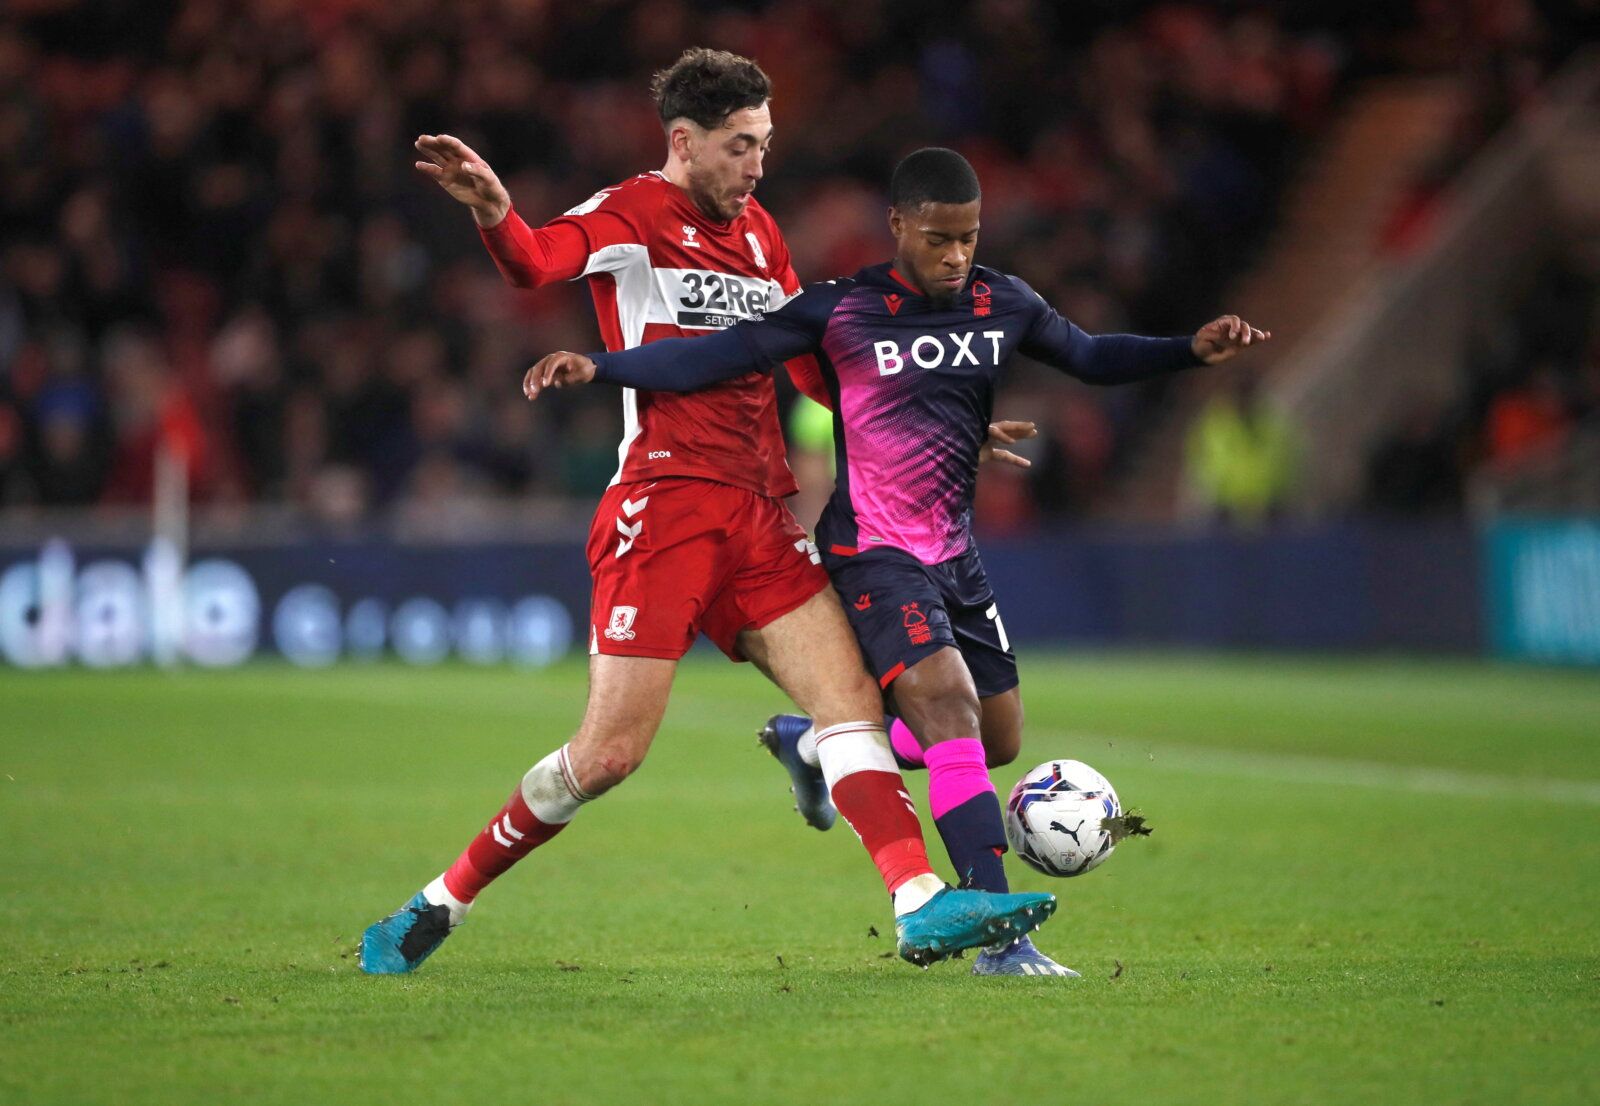 Soccer Football - Championship - Middlesbrough v Nottingham Forest - Riverside Stadium, Middlesbrough, Britain - December 26, 2021  Nottingham Forest's Xande Silva in action with Middlesbrough's Matty Crooks   Action Images/Lee Smith  EDITORIAL USE ONLY. No use with unauthorized audio, video, data, fixture lists, club/league logos or 